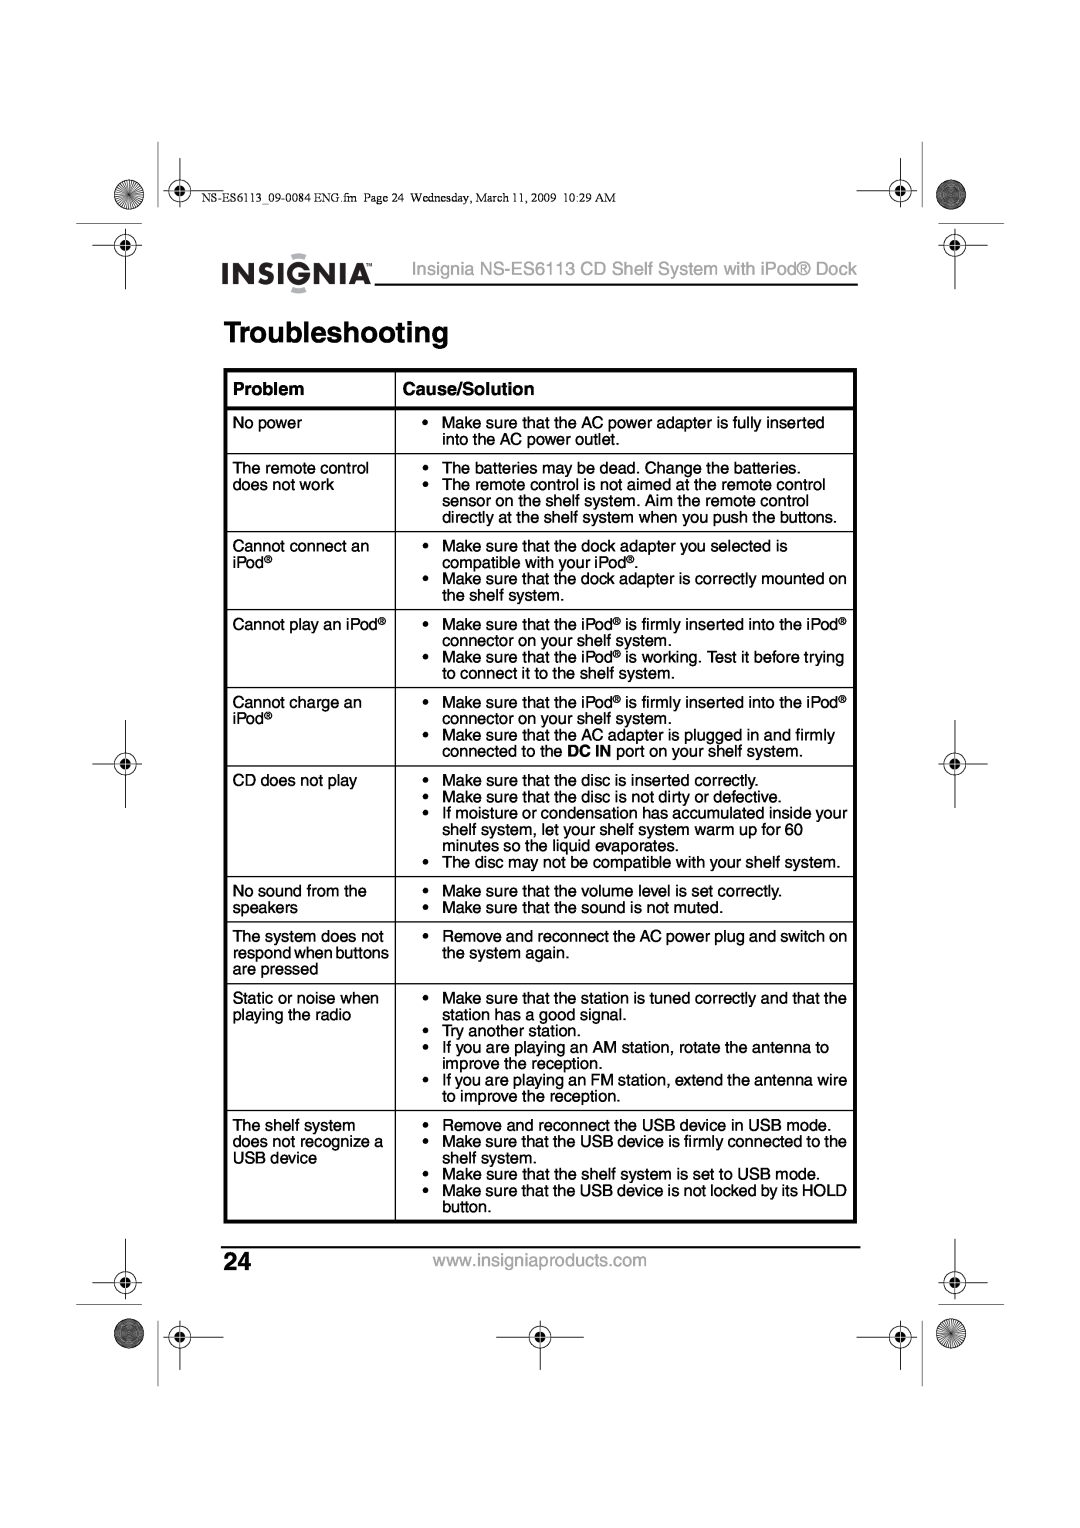 Insignia manual Troubleshooting, Problem, Cause/Solution, Insignia NS-ES6113CD Shelf System with iPod Dock 